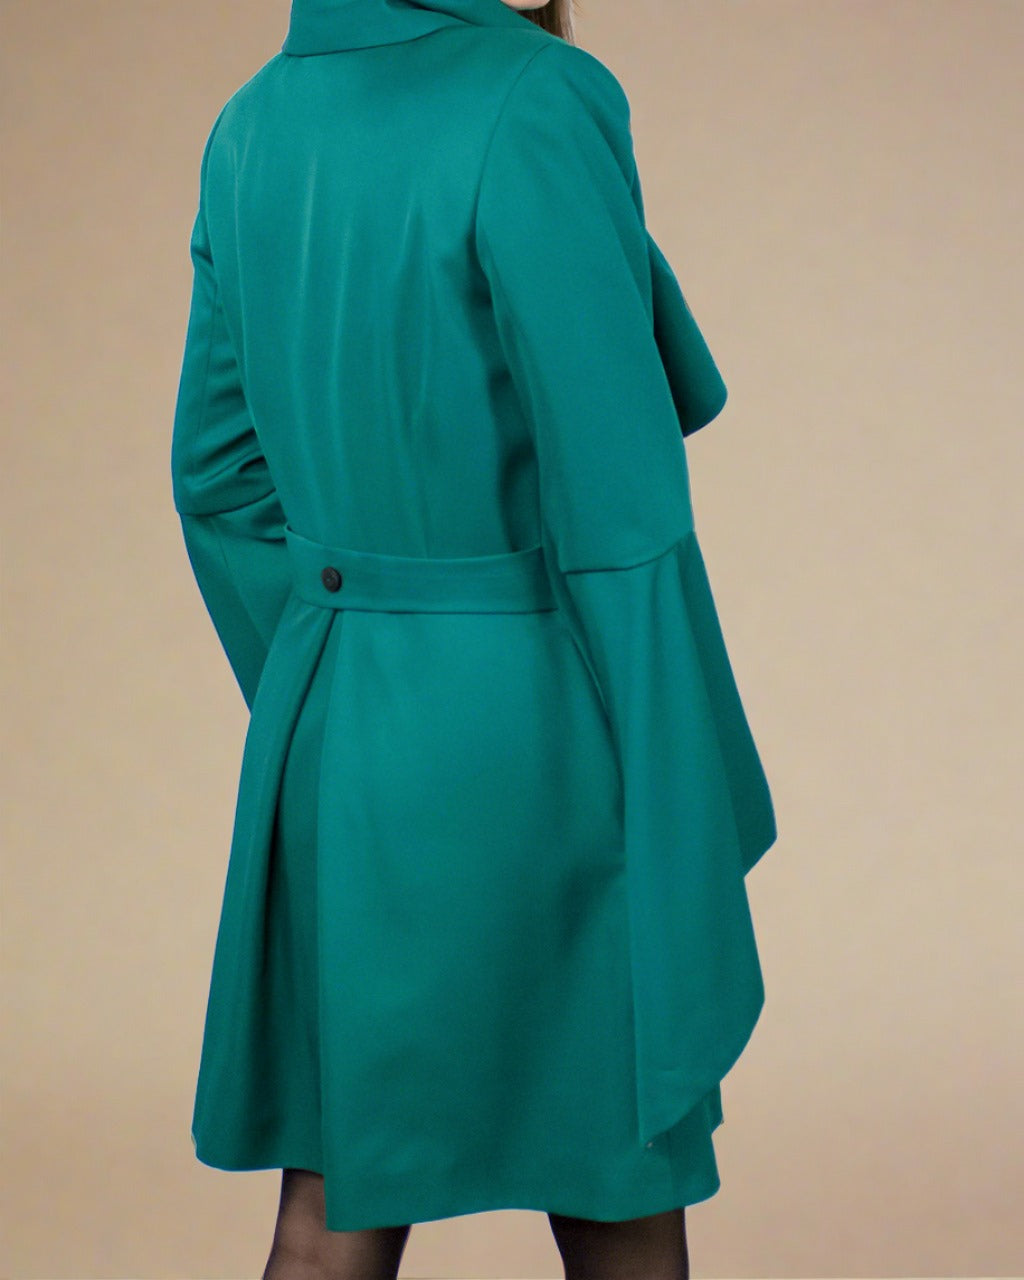 Back view of sustainable recycled forest dark green women's fit & flare classic spring coat jacket with bell sleeves and belt